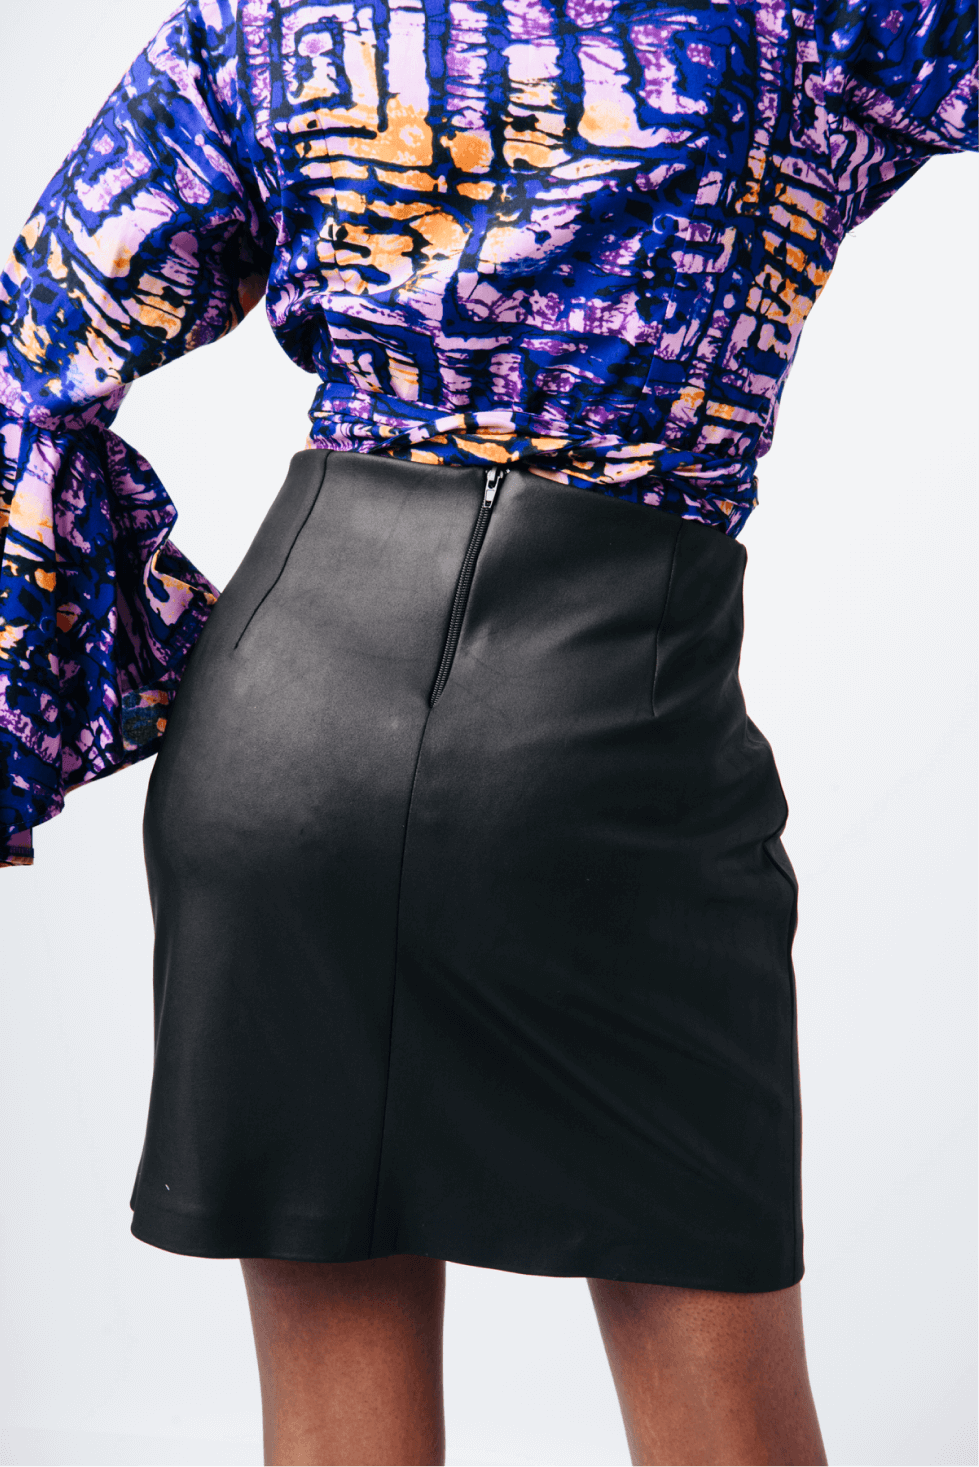 Shop Chera Vegan Leather Mini Skirt by Cyami Custom Fit on Arrai. Discover stylish, affordable clothing, jewelry, handbags and unique handmade pieces from top Kenyan & African fashion brands prioritising sustainability and quality craftsmanship.